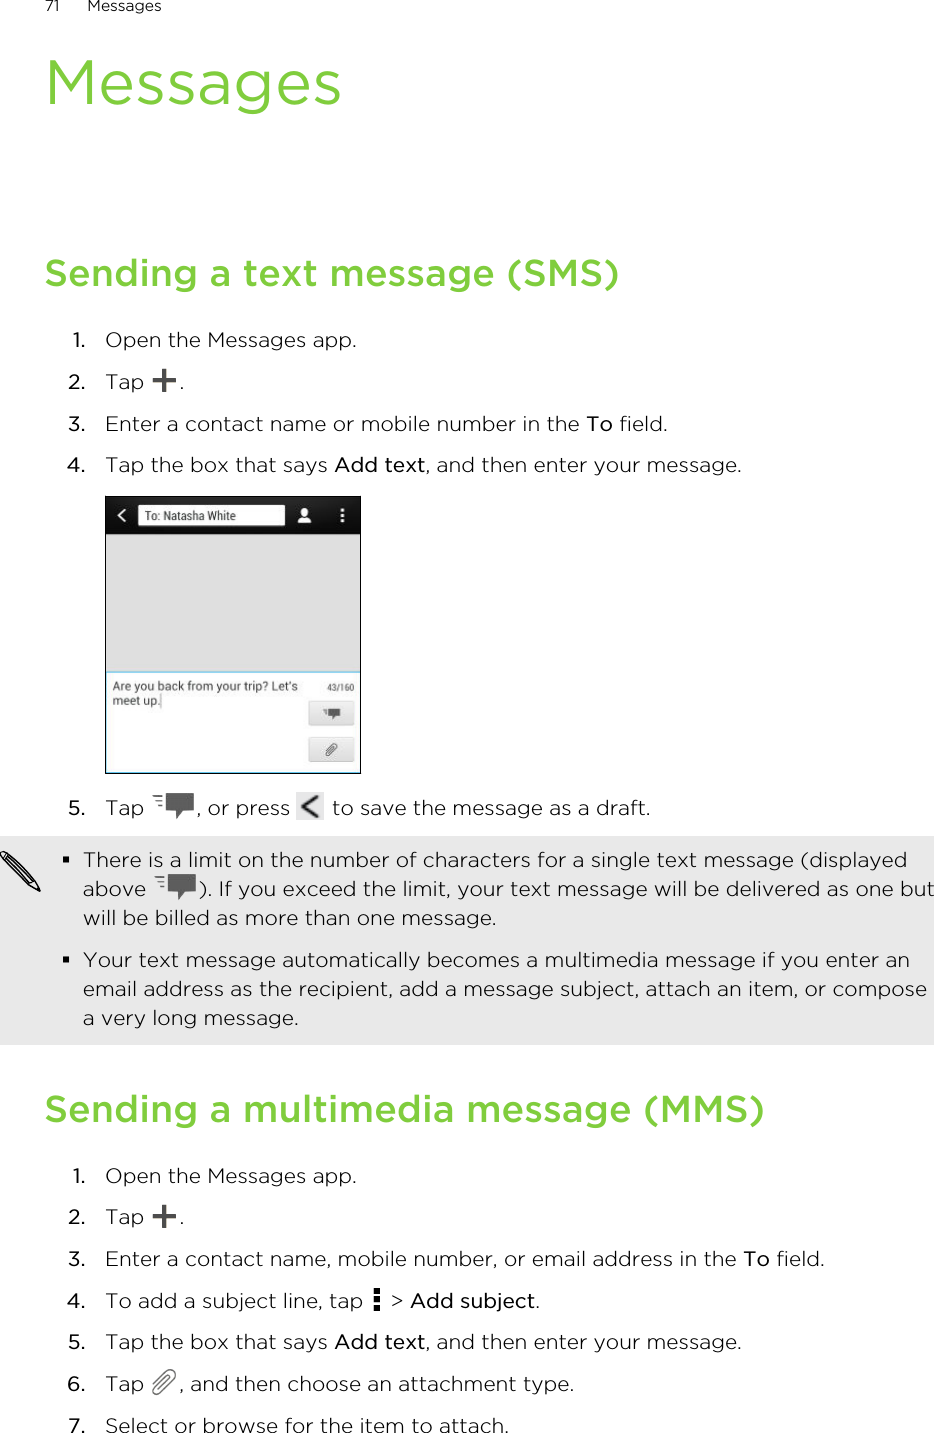 MessagesSending a text message (SMS)1. Open the Messages app.2. Tap  .3. Enter a contact name or mobile number in the To field.4. Tap the box that says Add text, and then enter your message. 5. Tap  , or press   to save the message as a draft. §There is a limit on the number of characters for a single text message (displayedabove  ). If you exceed the limit, your text message will be delivered as one butwill be billed as more than one message.§Your text message automatically becomes a multimedia message if you enter anemail address as the recipient, add a message subject, attach an item, or composea very long message.Sending a multimedia message (MMS)1. Open the Messages app.2. Tap  .3. Enter a contact name, mobile number, or email address in the To field.4. To add a subject line, tap   &gt; Add subject.5. Tap the box that says Add text, and then enter your message.6. Tap  , and then choose an attachment type.7. Select or browse for the item to attach.71 MessagesHTC Confidential for Certification HTC Confidential for Certification 